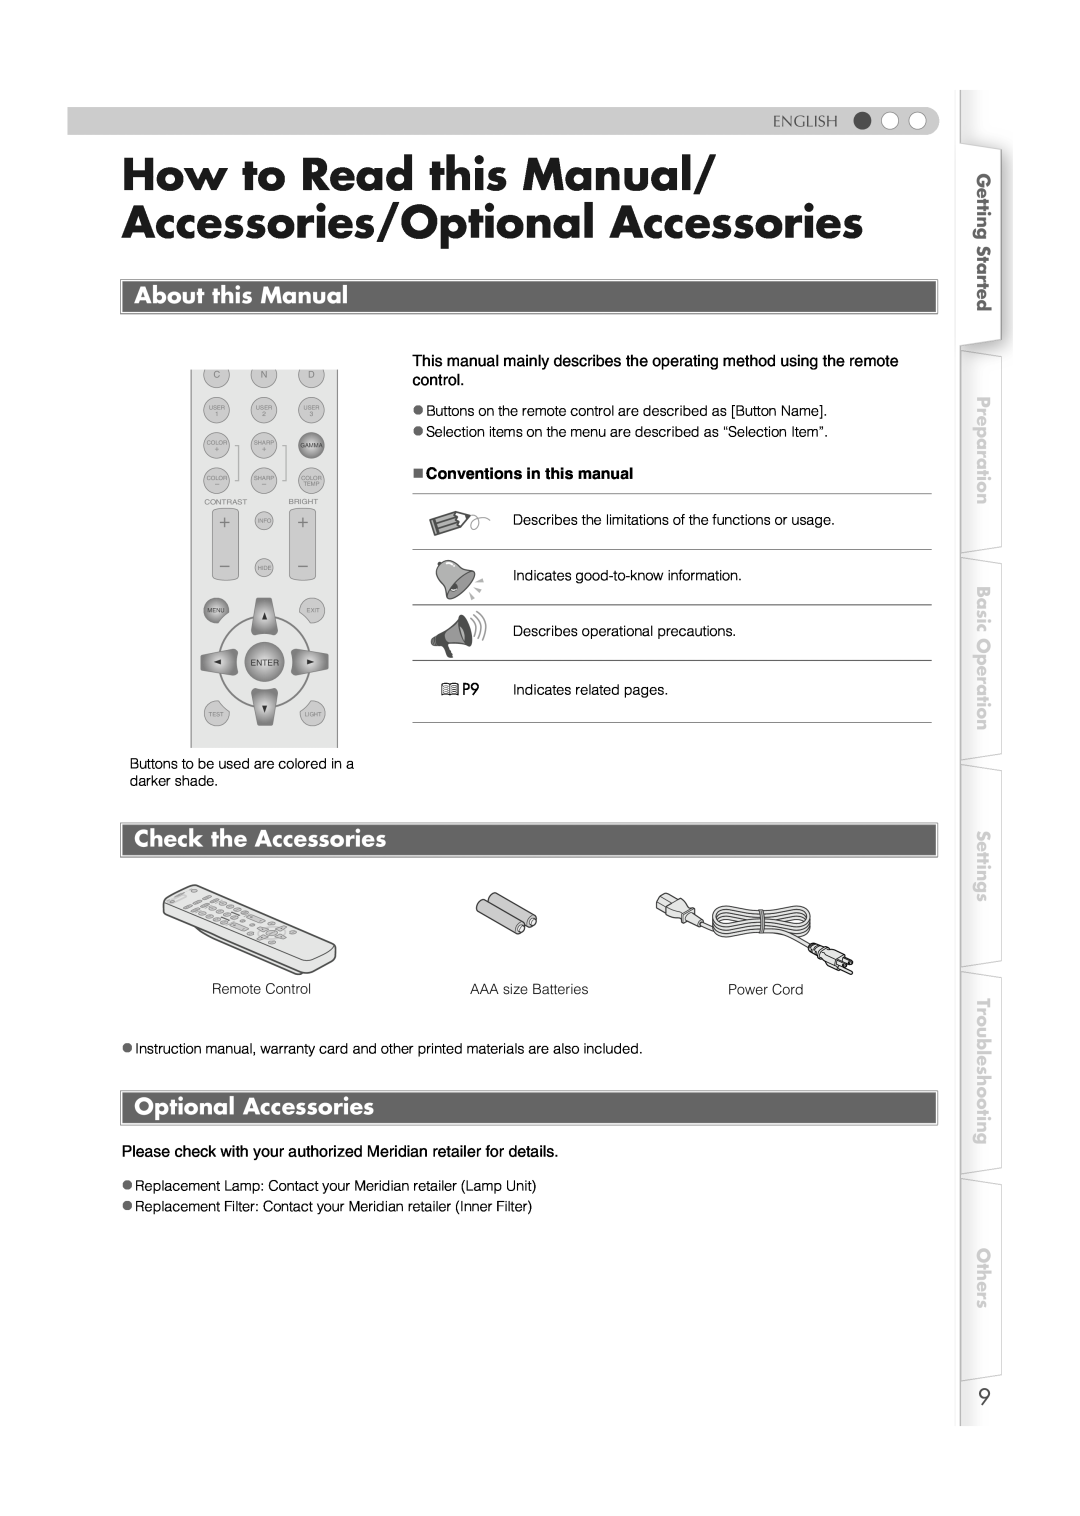 Meridian Audio MF-10 How to Read this Manual/ Accessories/Optional Accessories, About this Manual, Check the Accessories 